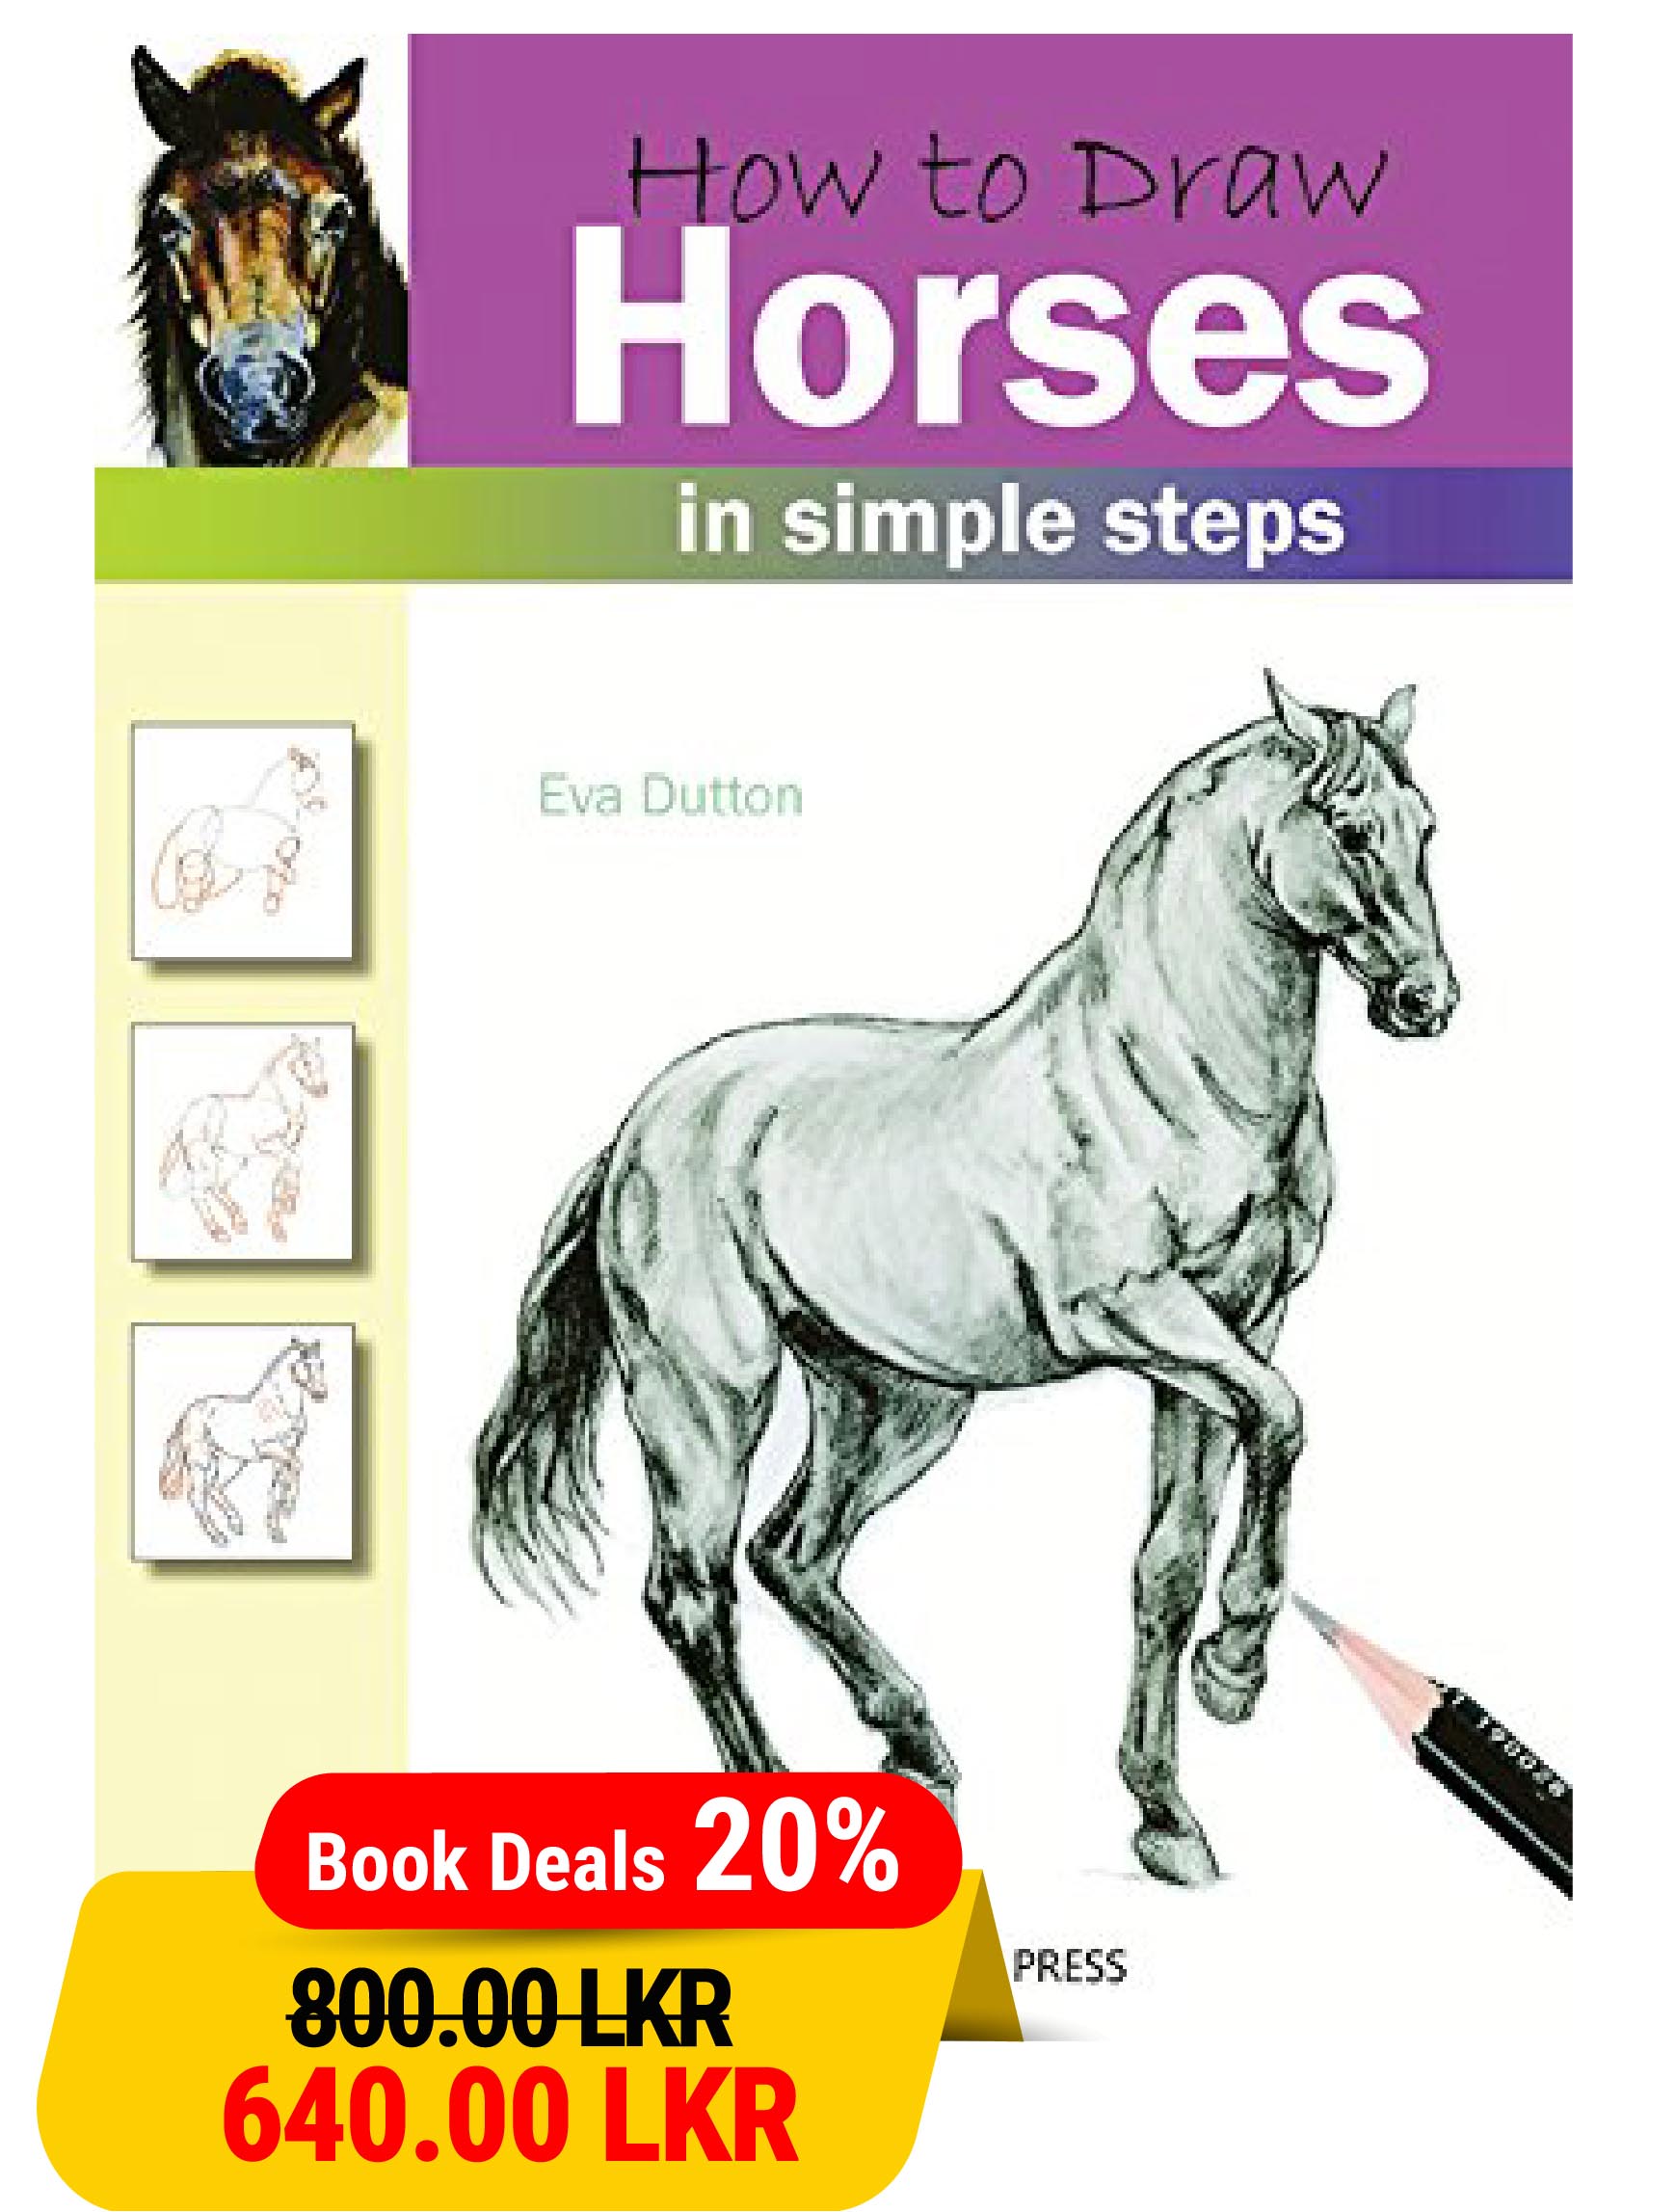 How To Draw Horses in Simple Steps